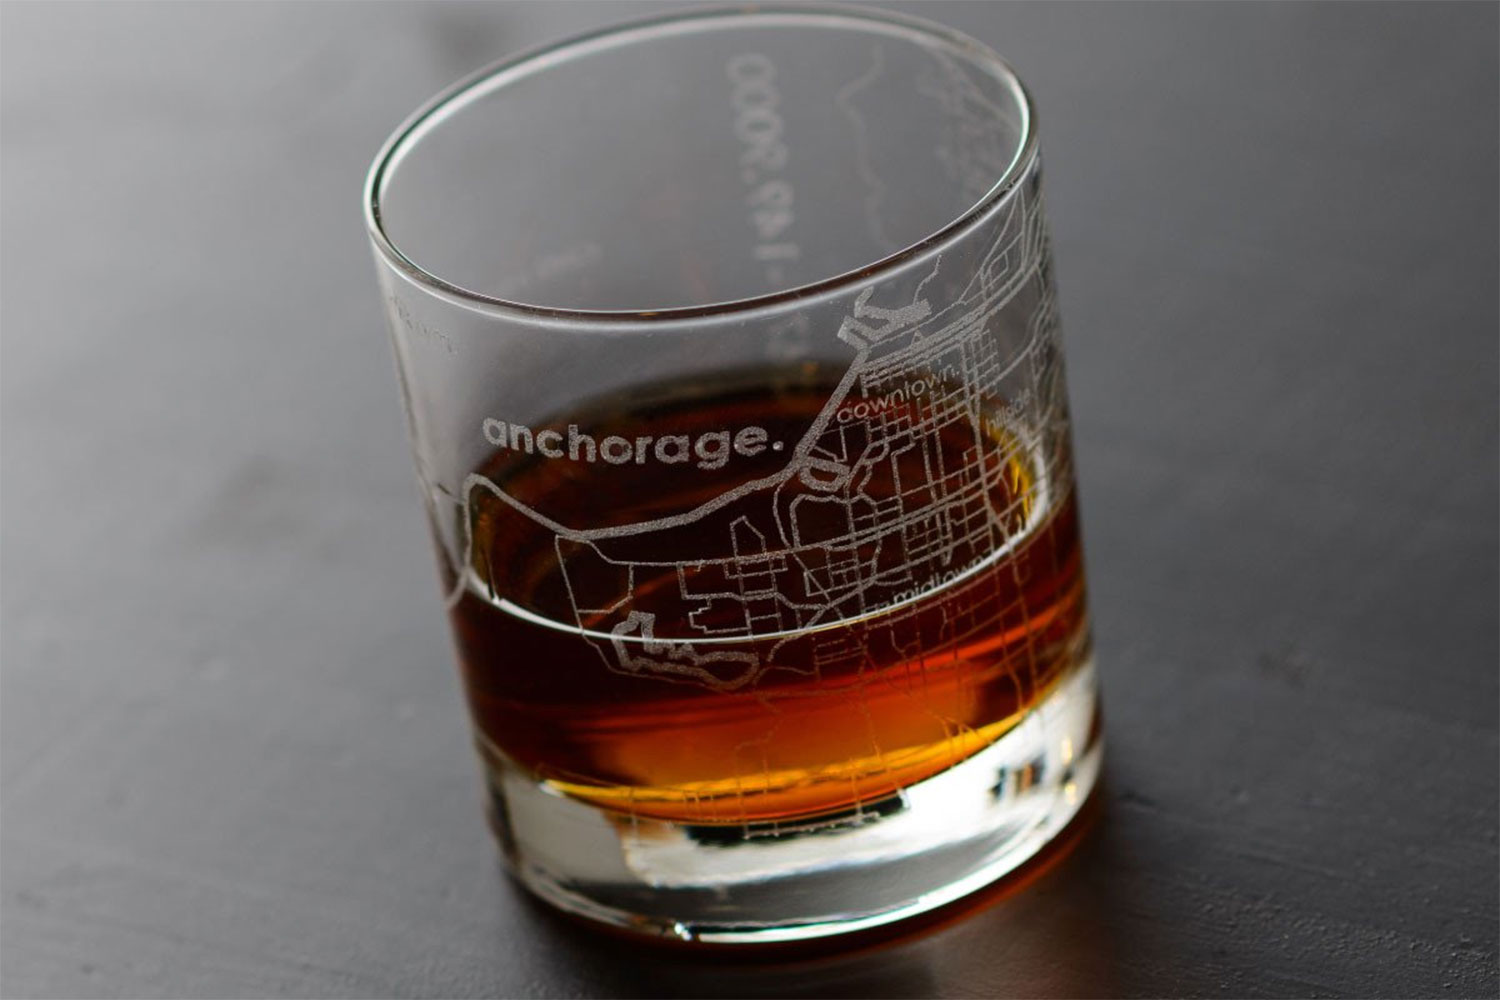 Washington Whiskey Watch: Norlan Whisky Glass: First Thoughts